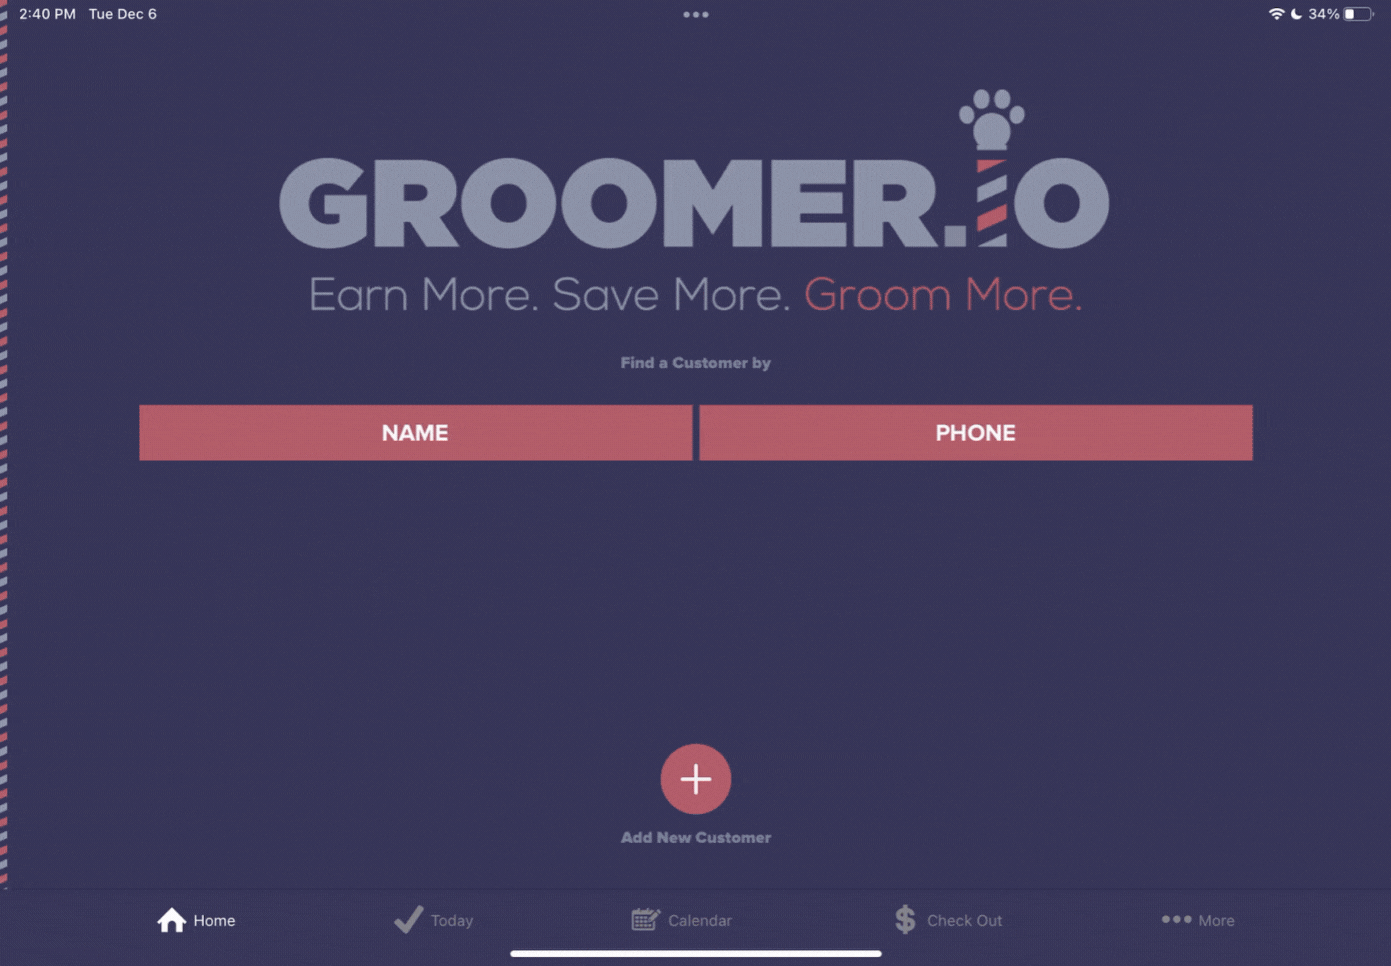 Employe availability on Groomer.io for scheduling